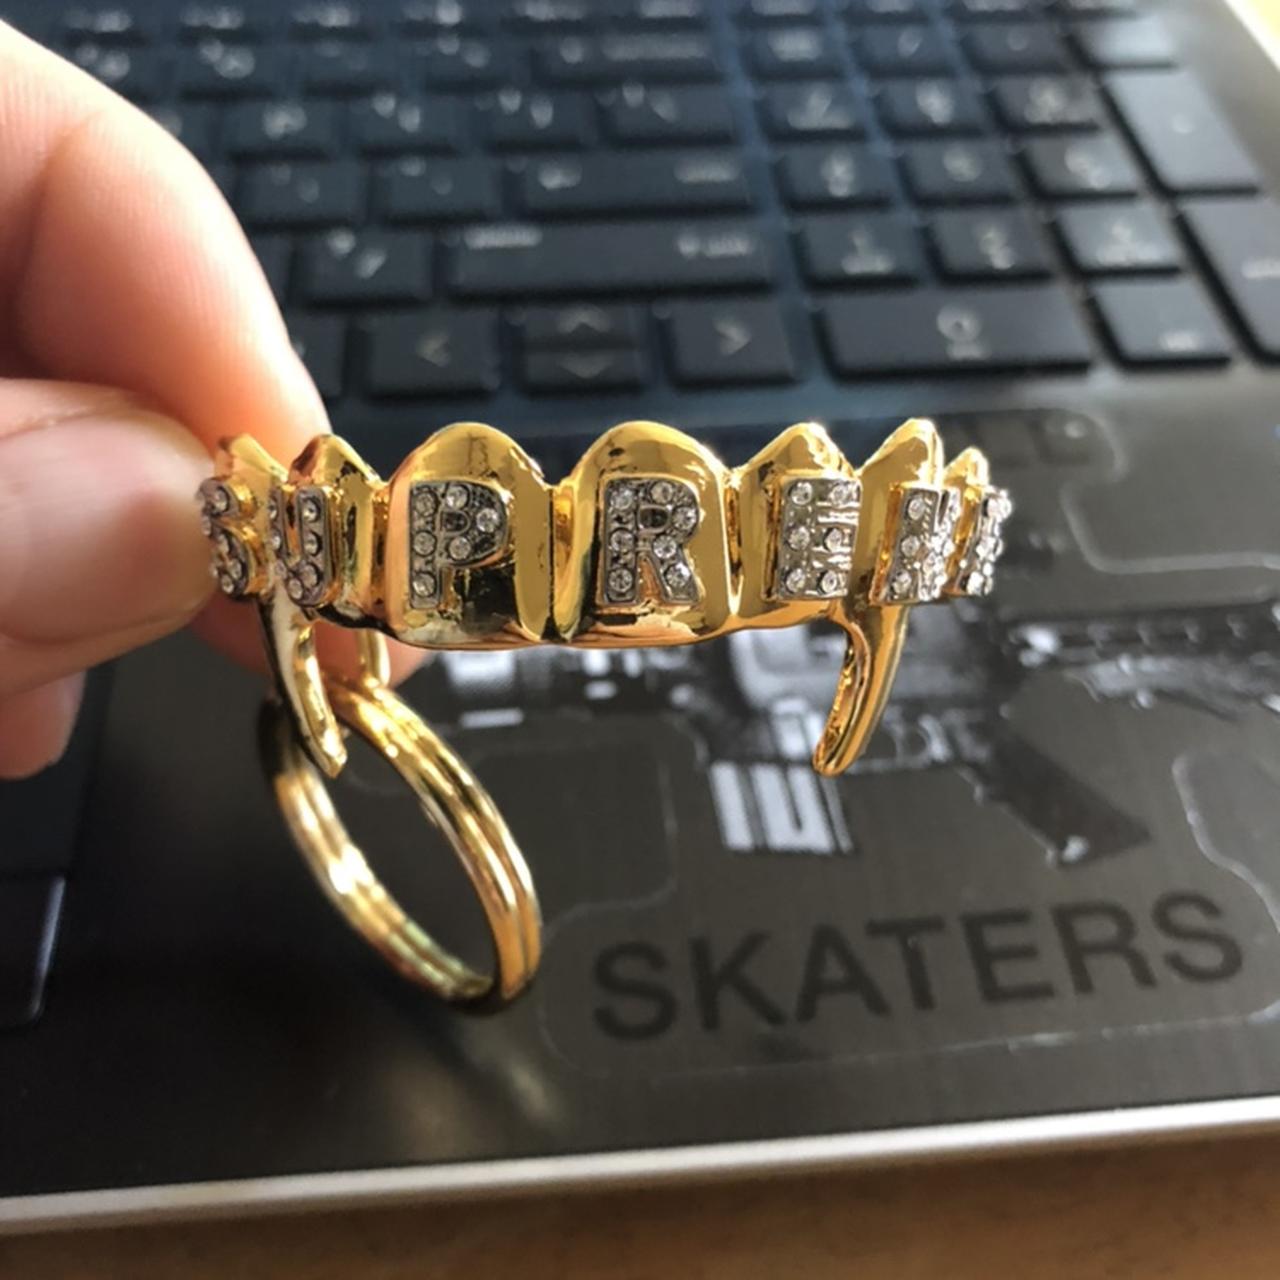 Supreme Fronts Keychain , 24k gold plated grill...